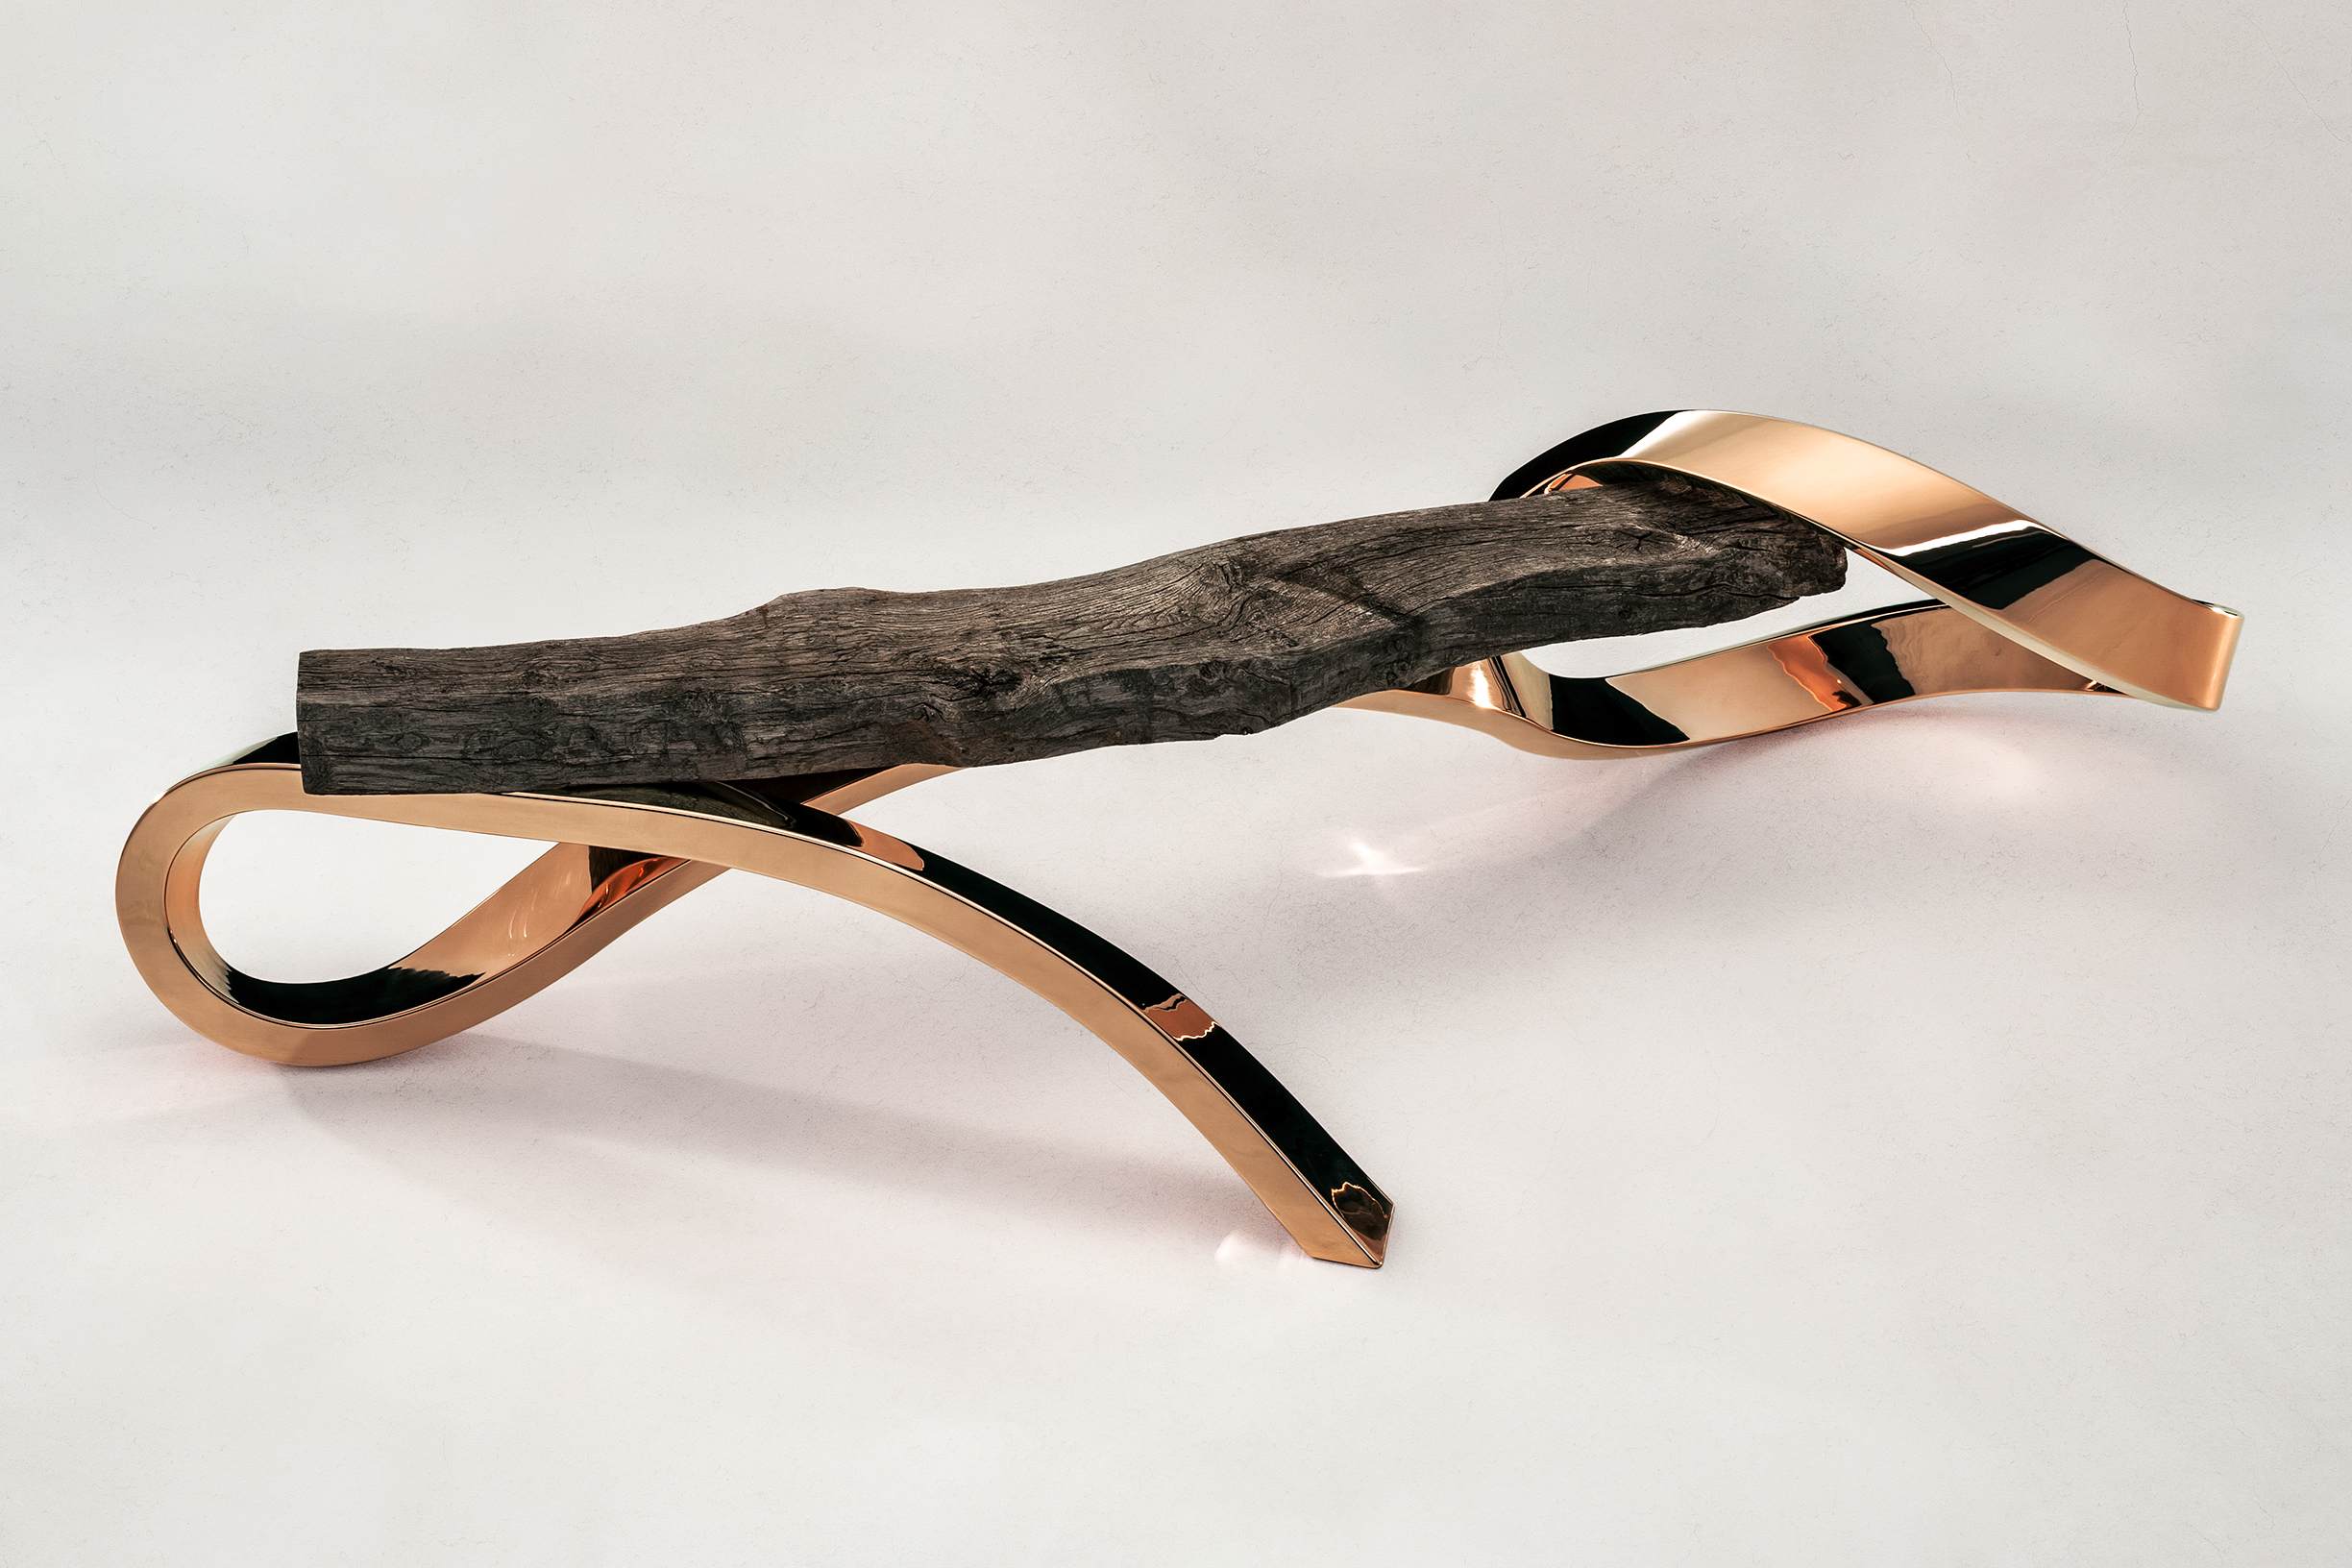 COPPER & BRONZED OAK BENCH. Shop and Give Back to the Rainforest Trust. - [Epicurus Life]